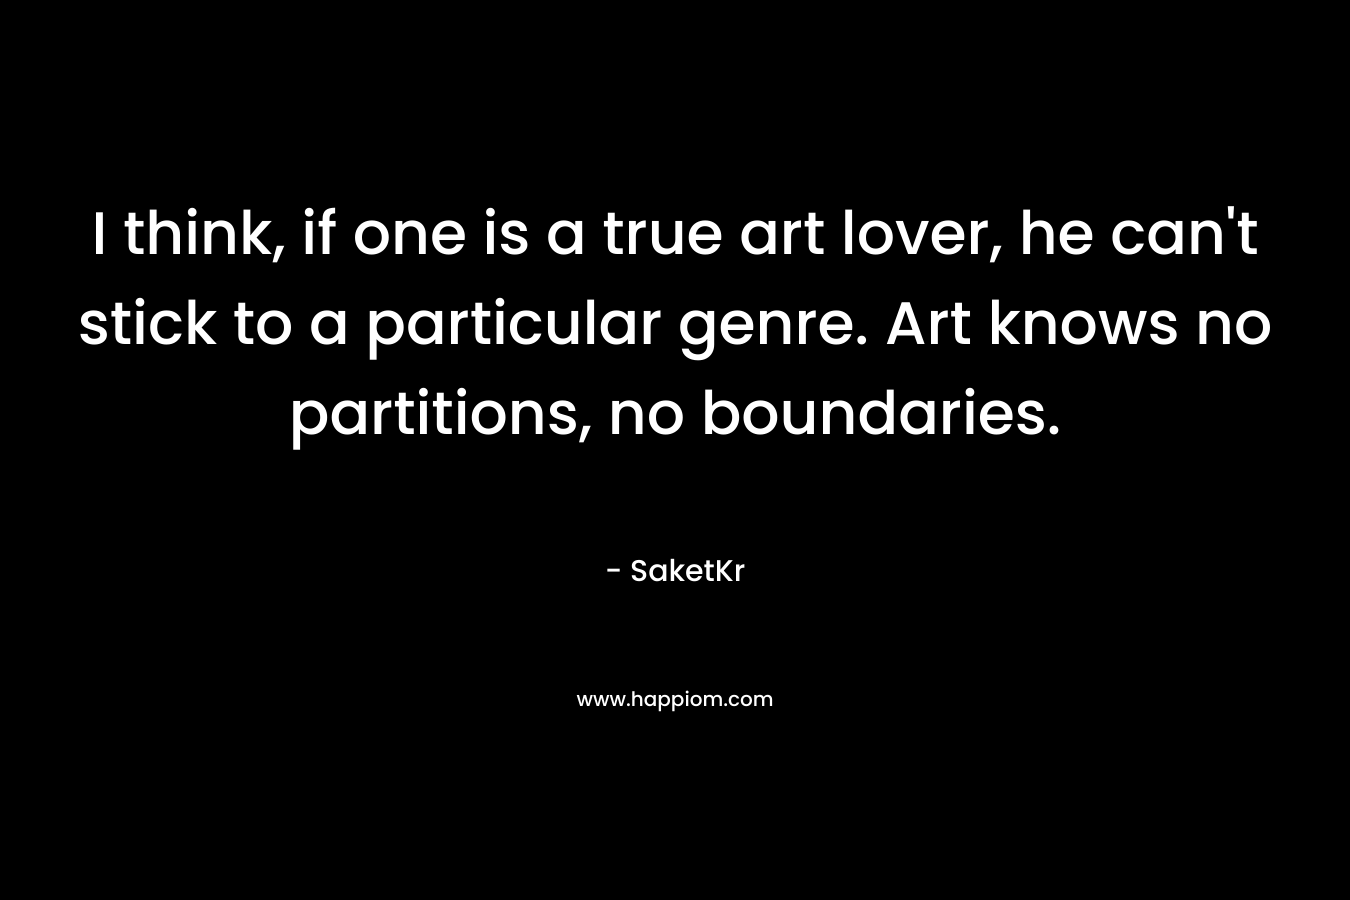 I think, if one is a true art lover, he can’t stick to a particular genre. Art knows no partitions, no boundaries. – SaketKr